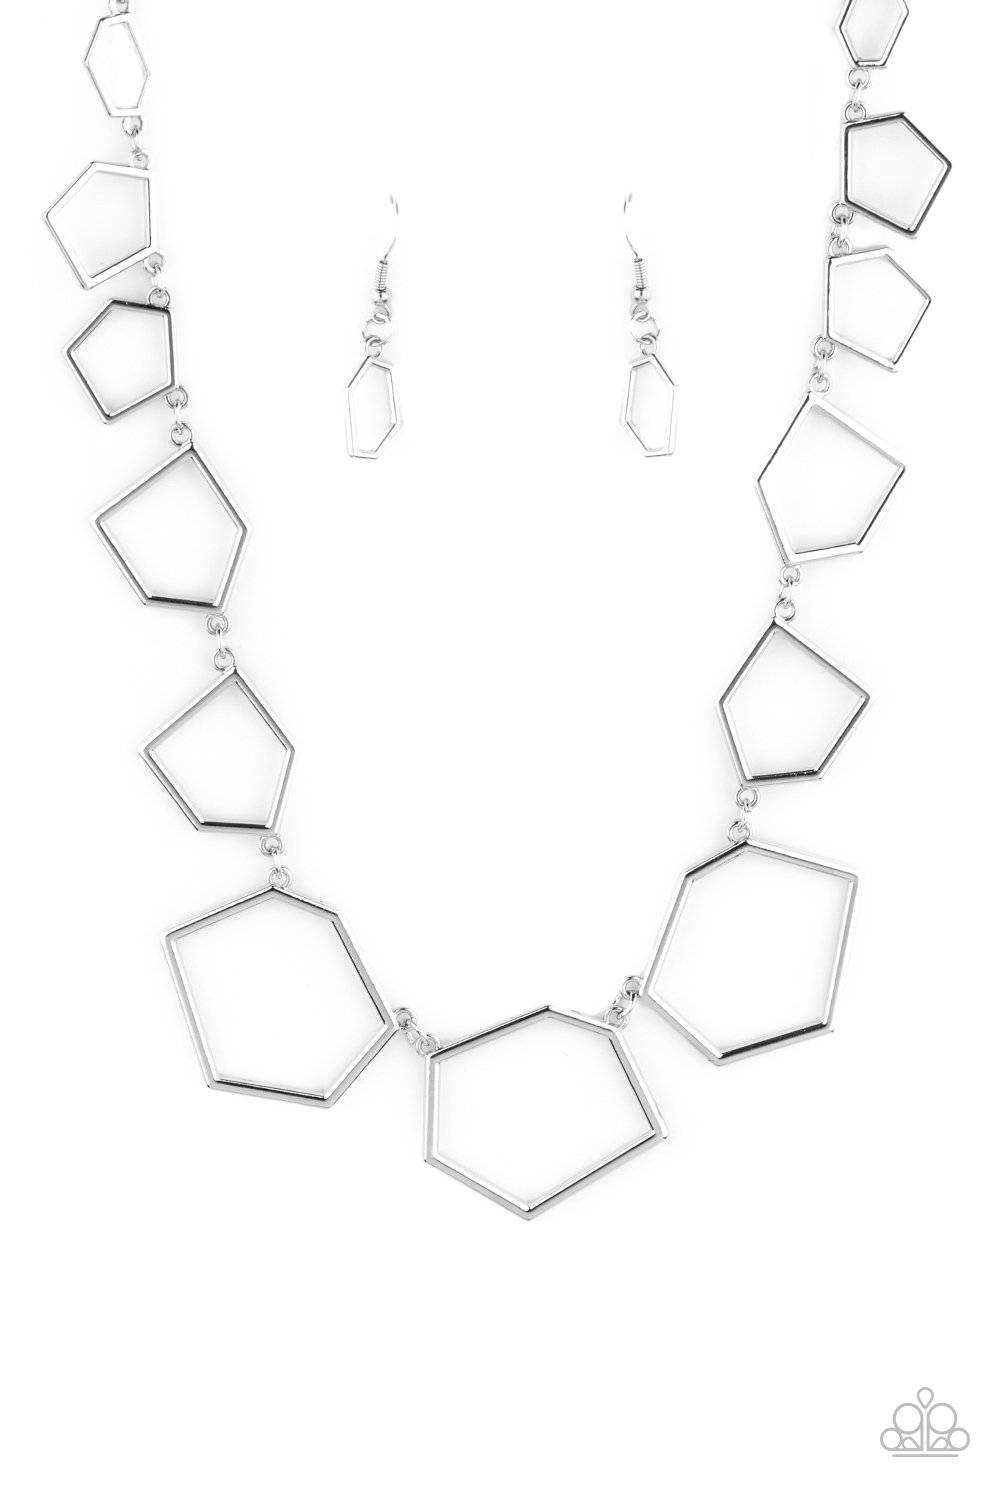 A273 - Full Frame Fashion Silver Necklace by Paparazzi Accessories on Fancy5Fashion.com